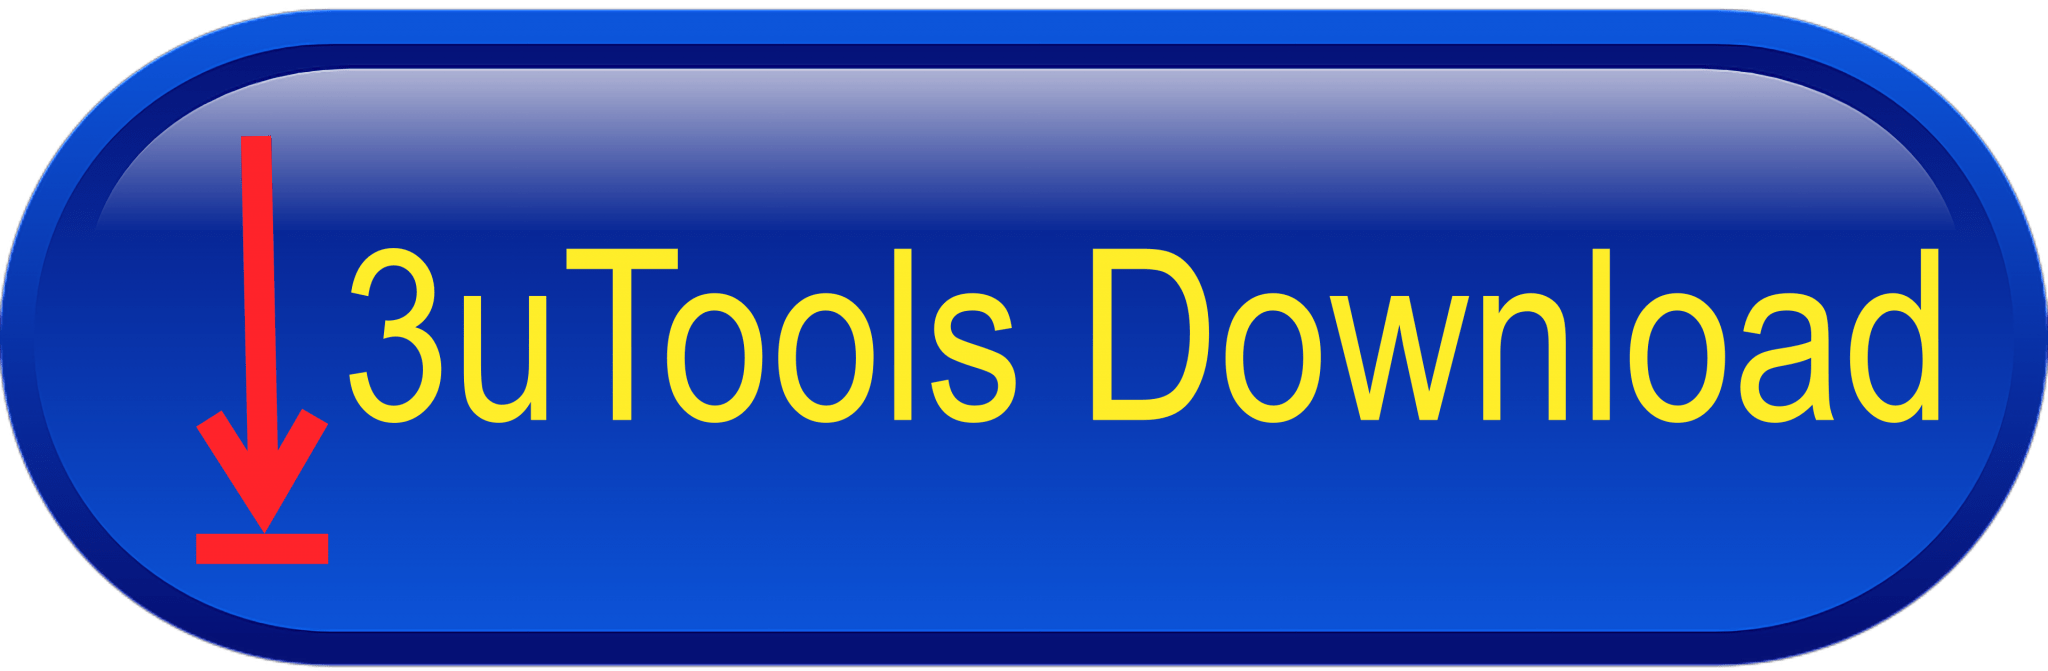 download the last version for apple 3utools 3.03.017